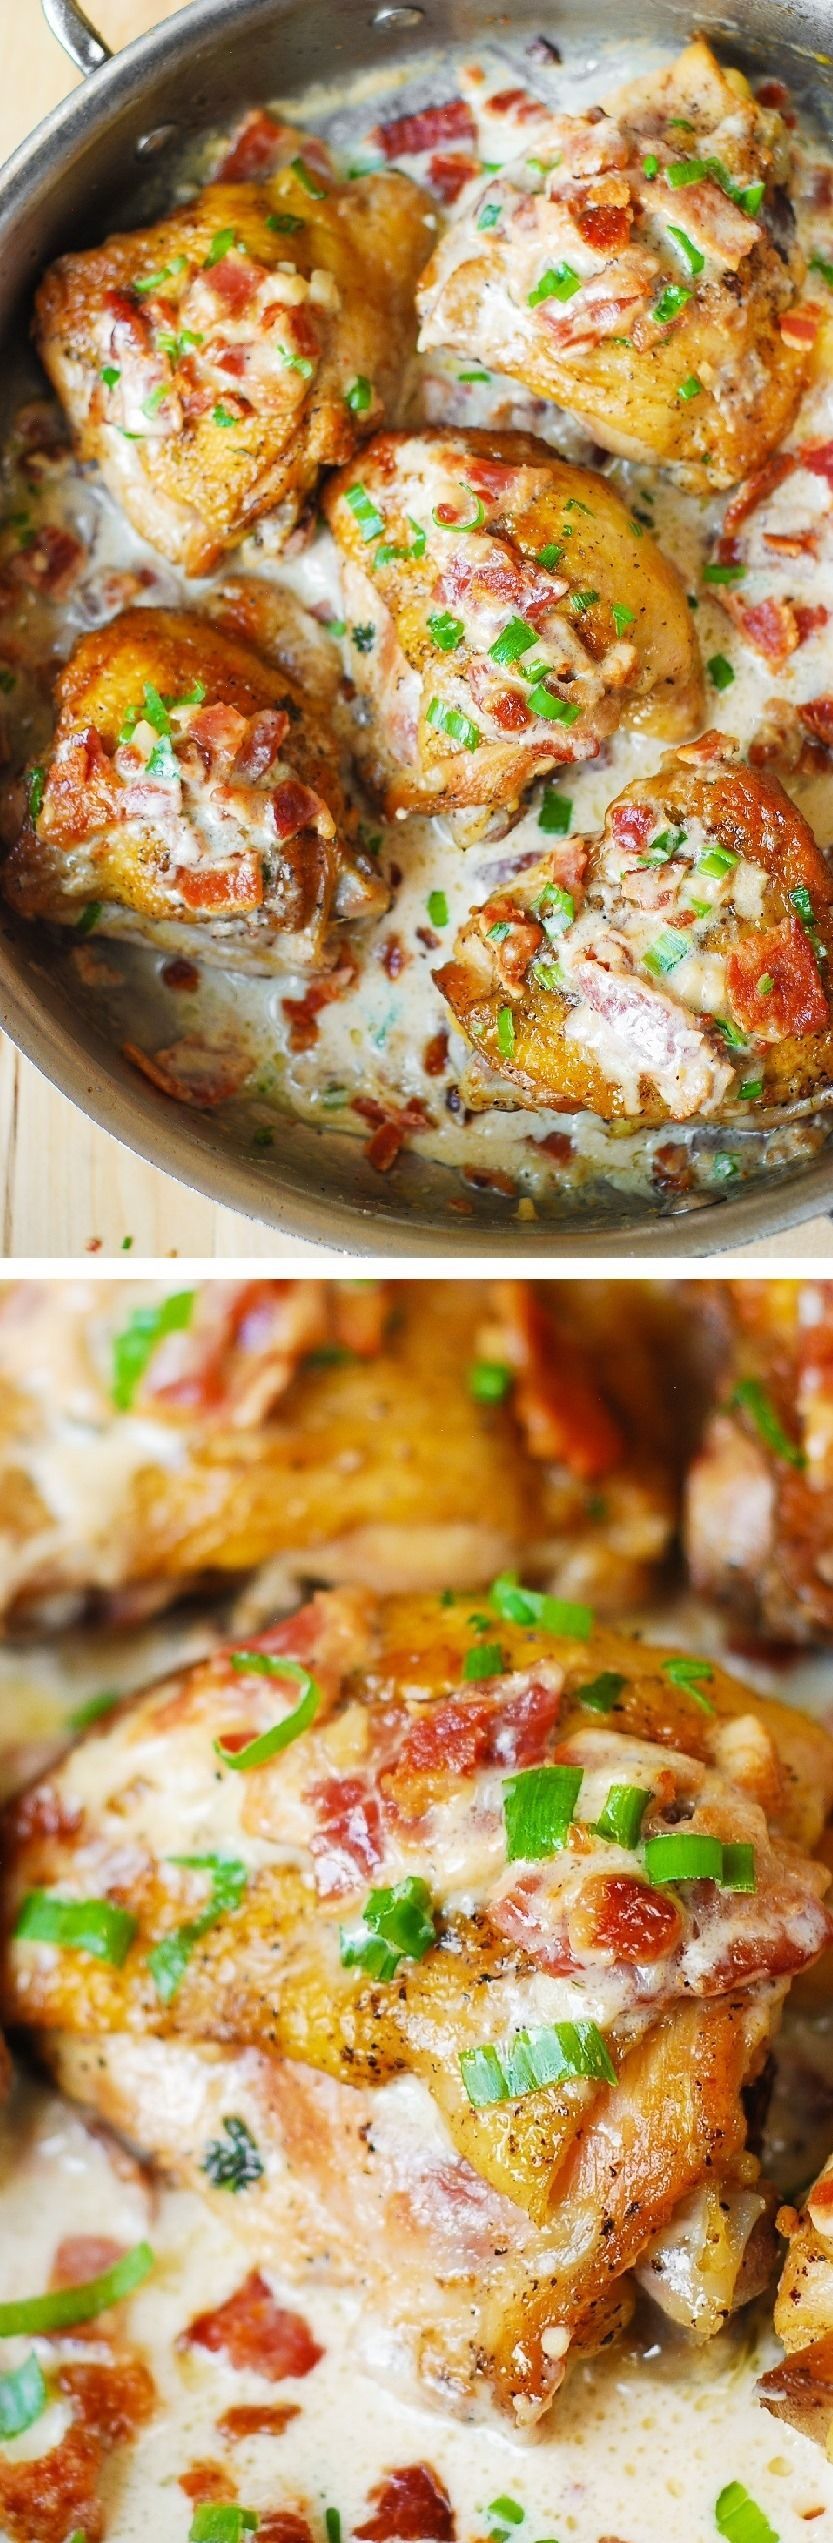 Pan-fried chicken thighs in a creamy bacon sauce with a touch of lemon! Quick and easy recipe for skin-on, bone-in chicken thighs.